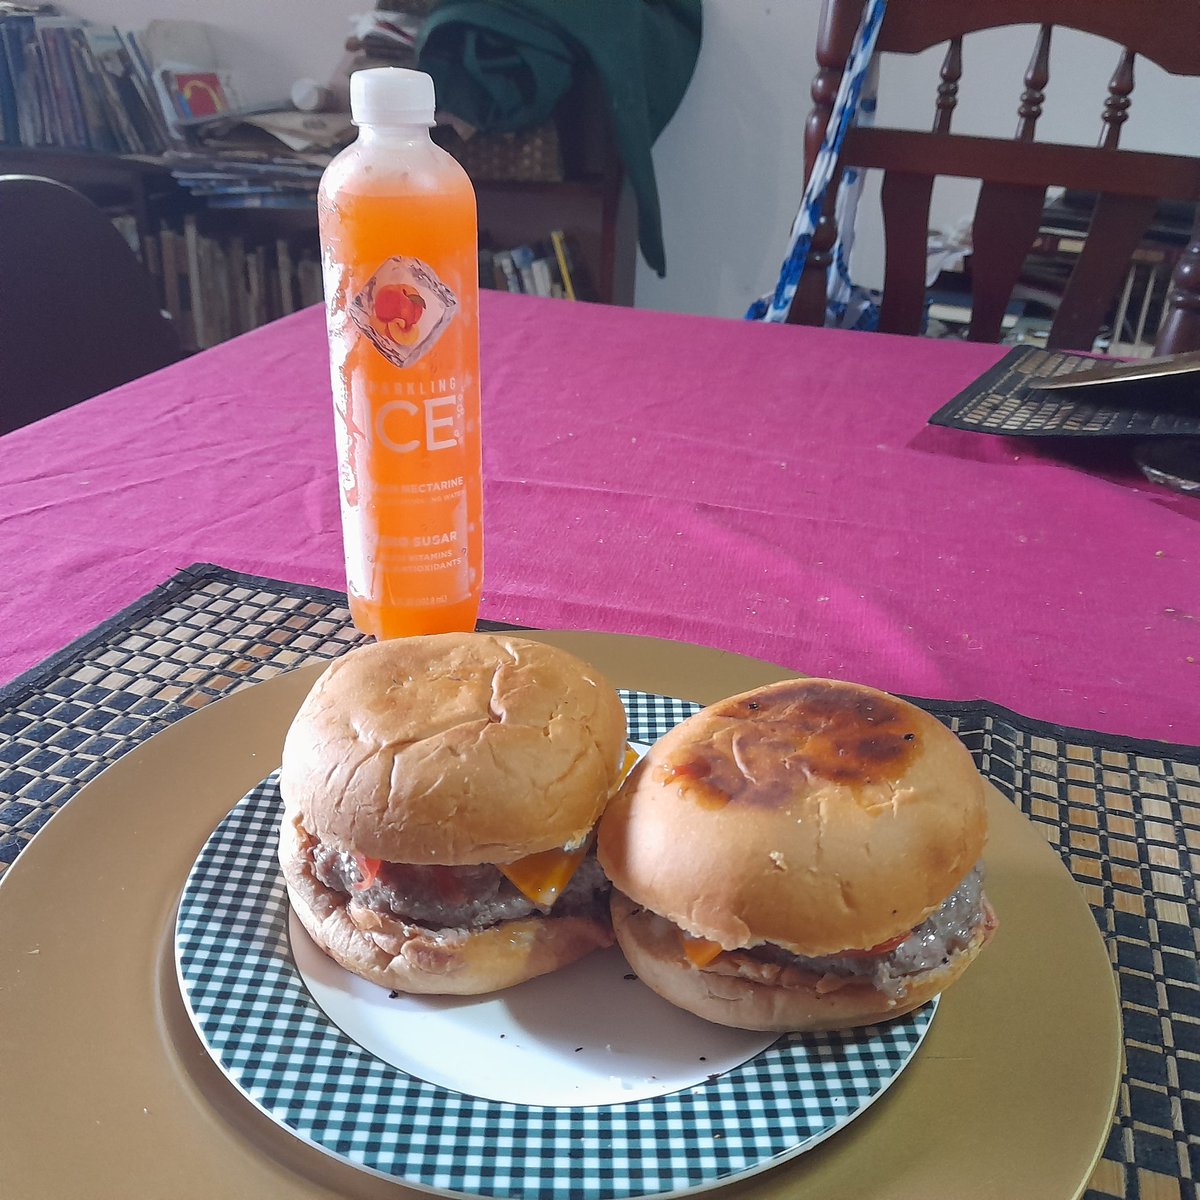 I prepared these hamburgers for my mom and me at lunch!
#photo #LunchTime #SparklingMoments